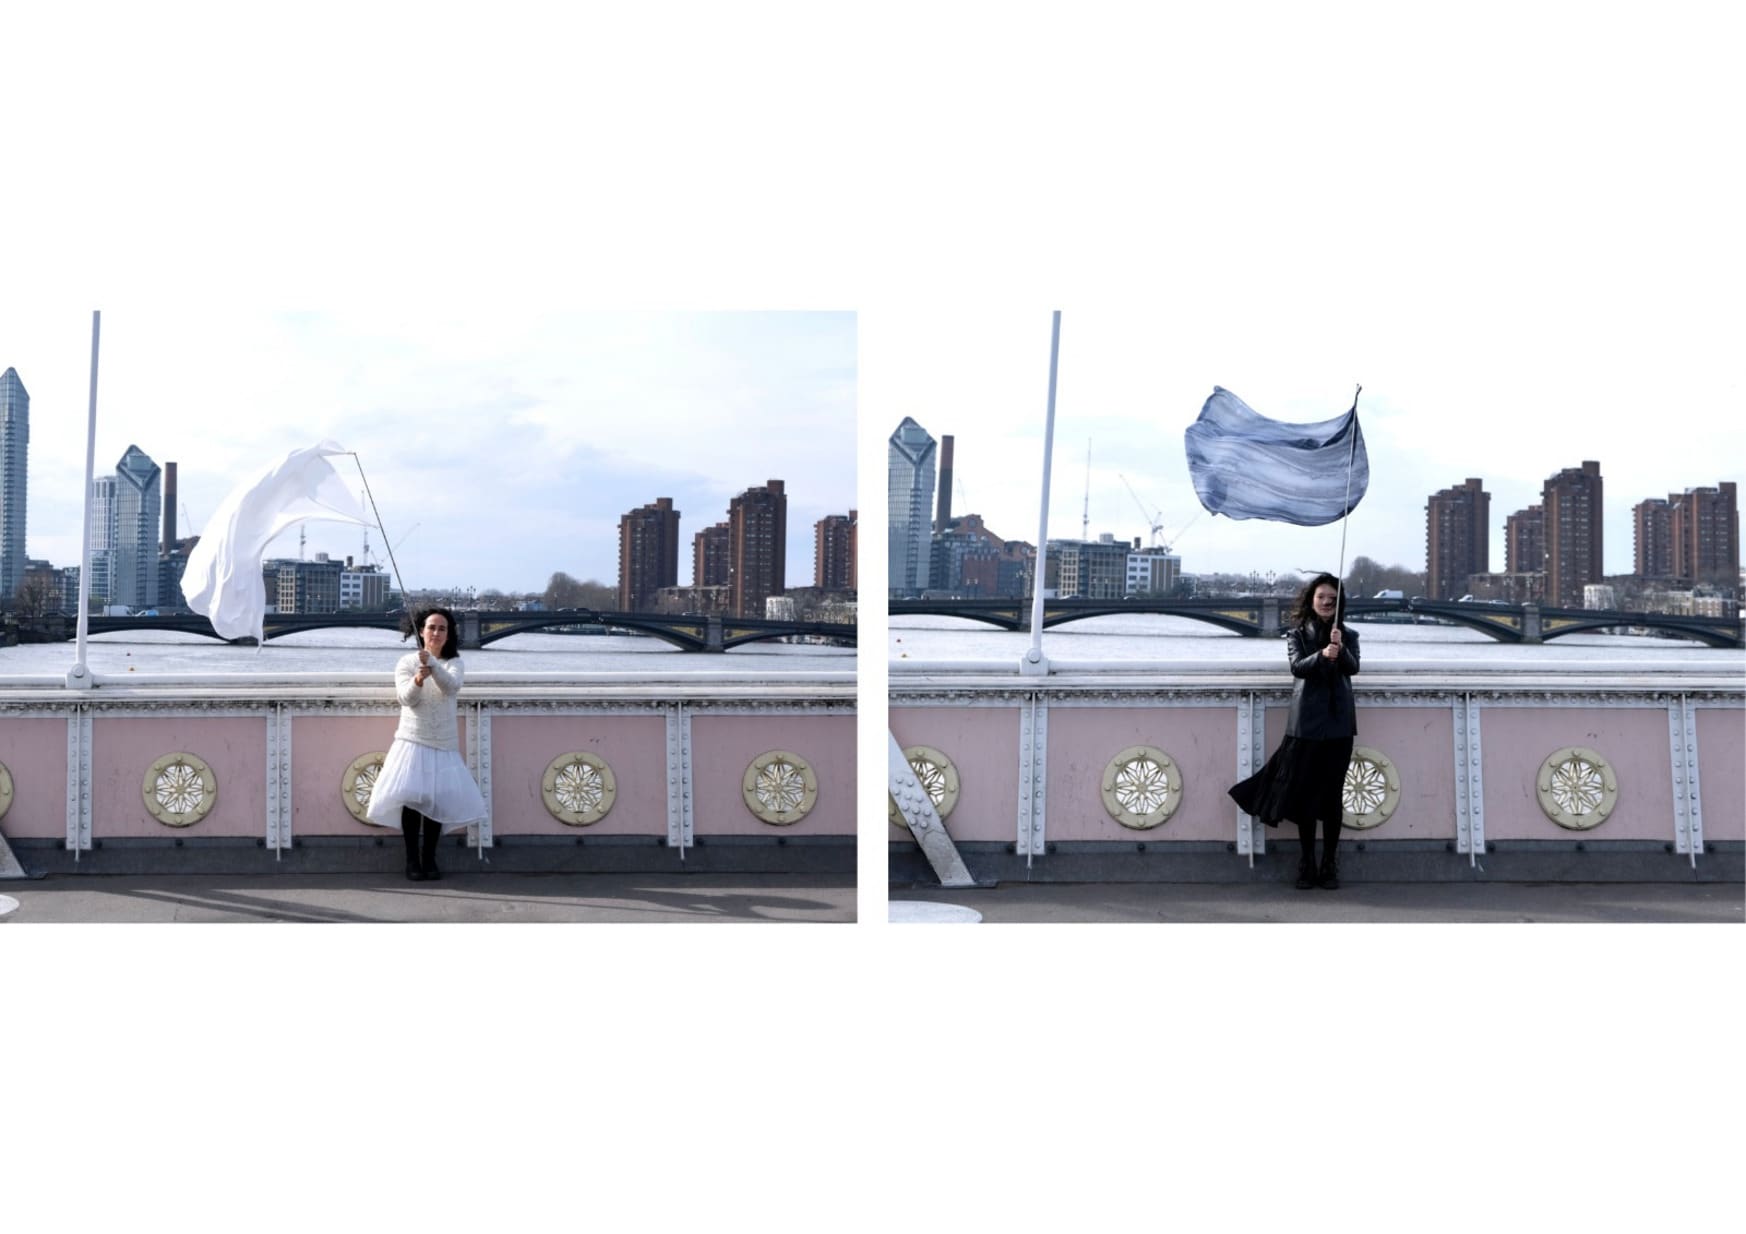 Two women holding flags, one white and one dyed black, on the Battersea Bridge